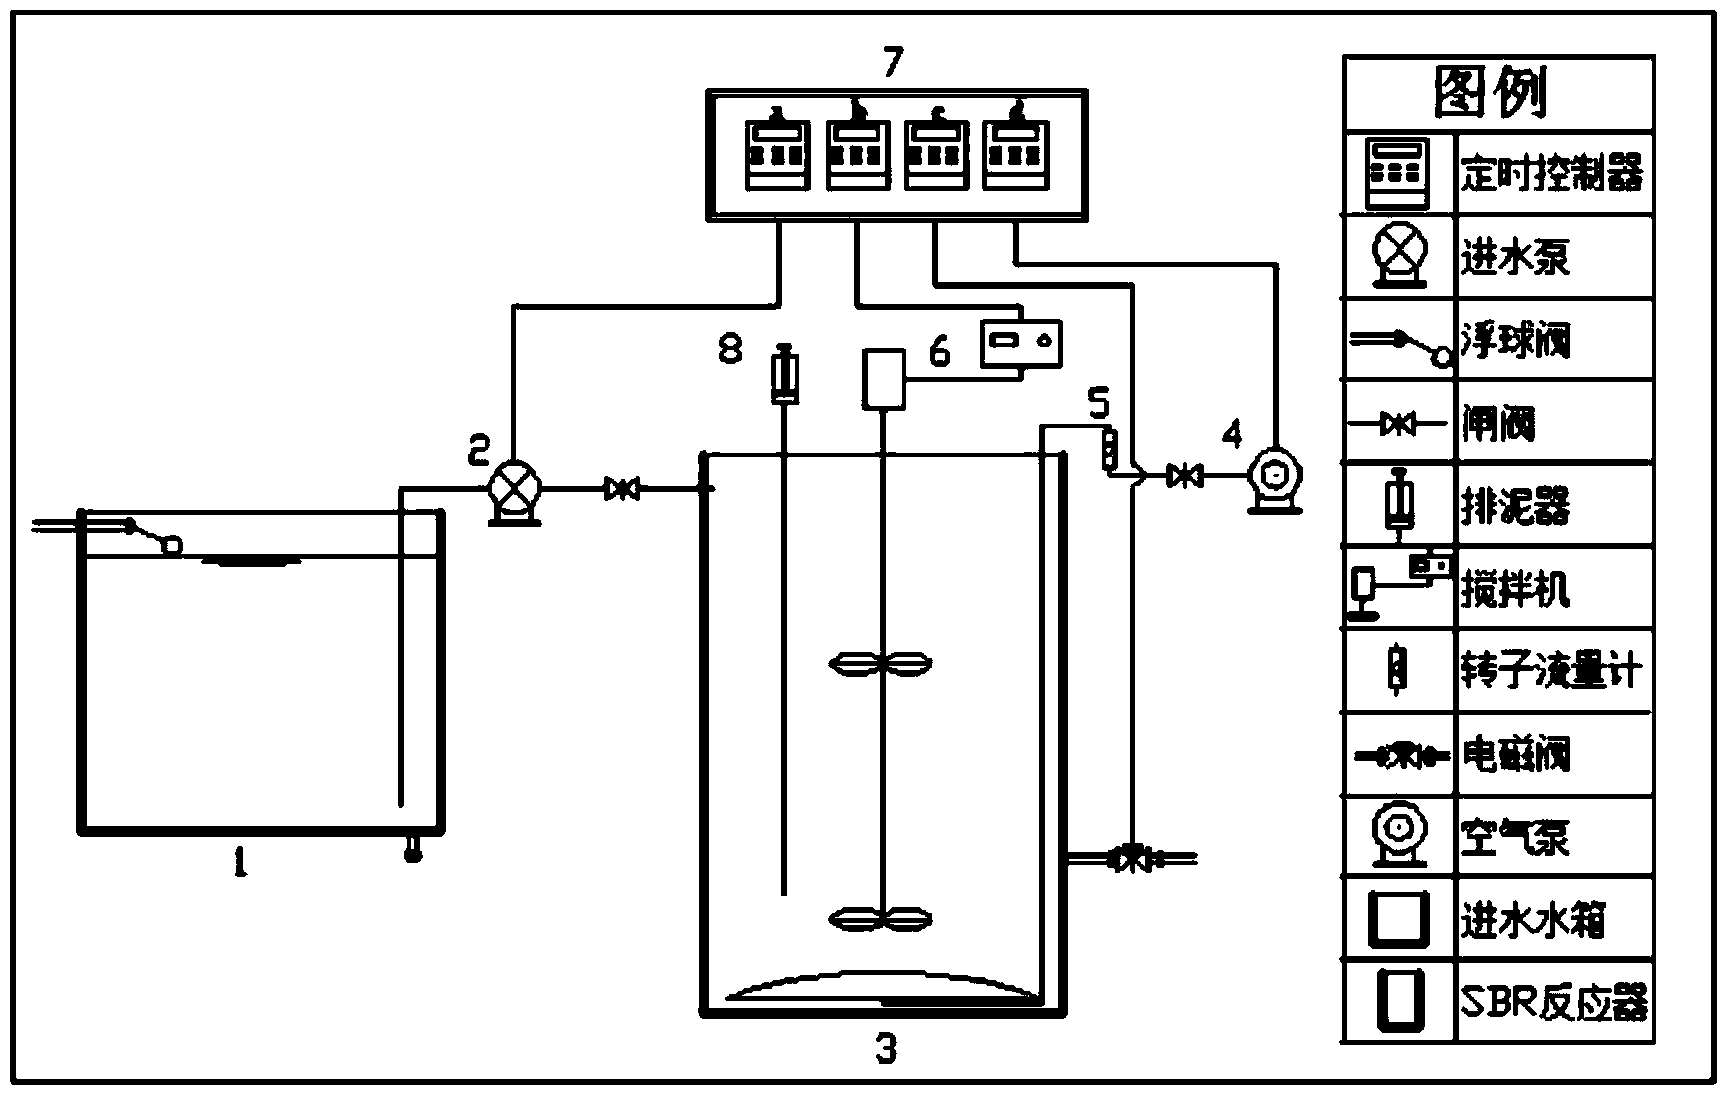 Sequencing batch reaction device and method for carrying out dephosphorization and partial nitrification on low-carbon urban sewage in single-sludge system